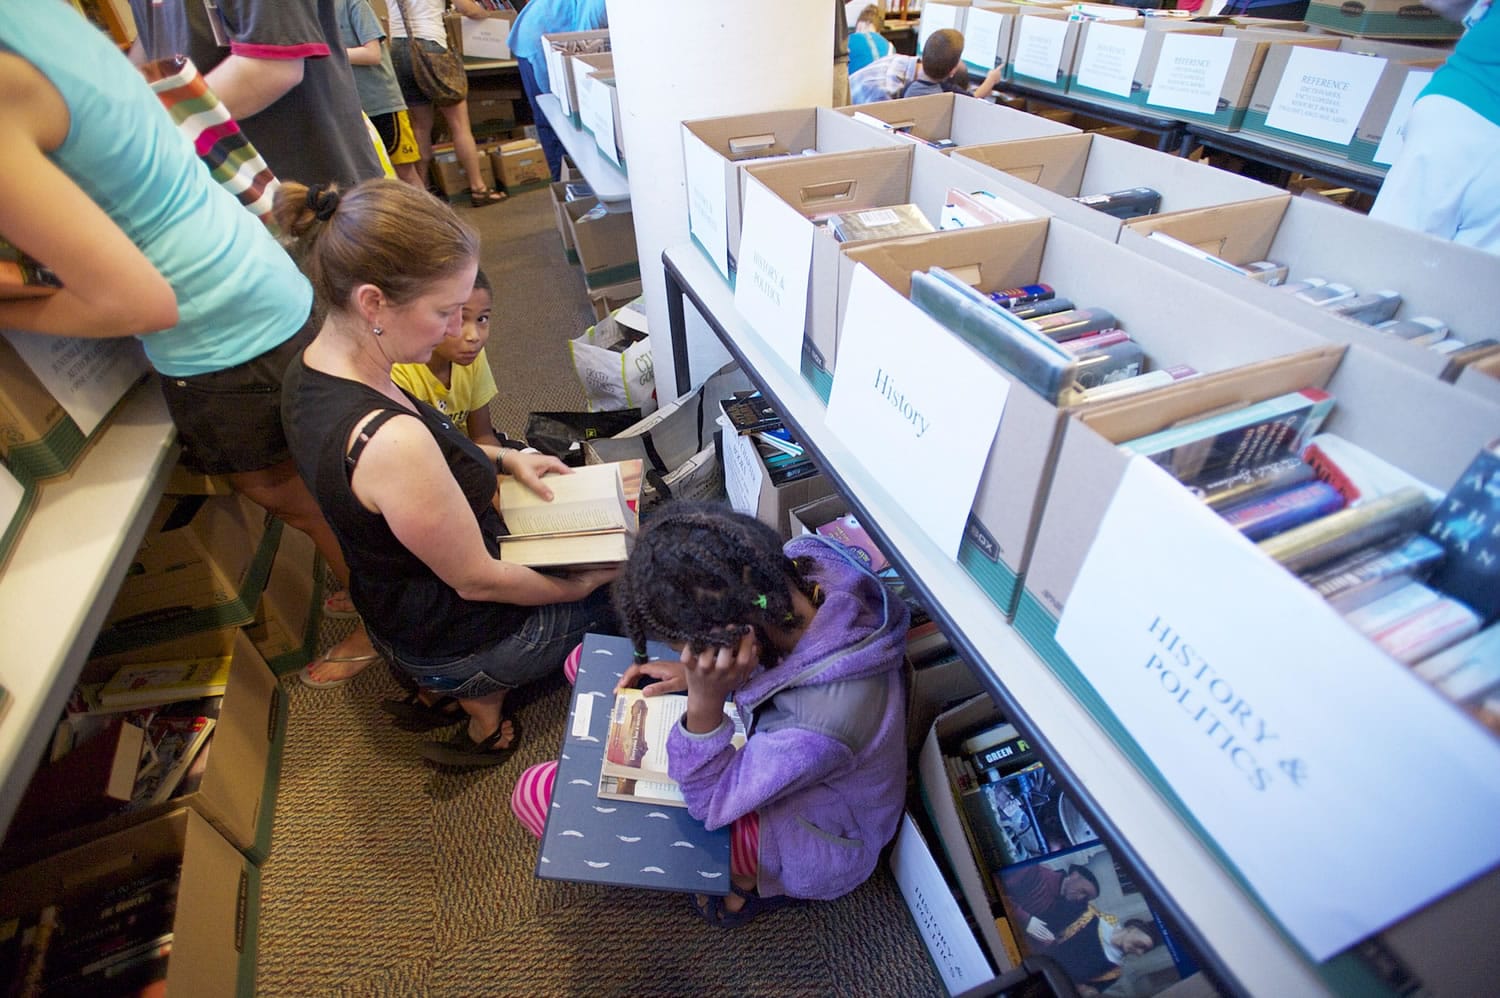 The Tsikayi family from Hockinson, from left, mom Chris, son Isaiah, 9, and Victoria, 10, were among the bargain-hunting bibliophiles at Bookfest '15, the Fort Vancouver Regional Library Foundation's summer super sale Friday.